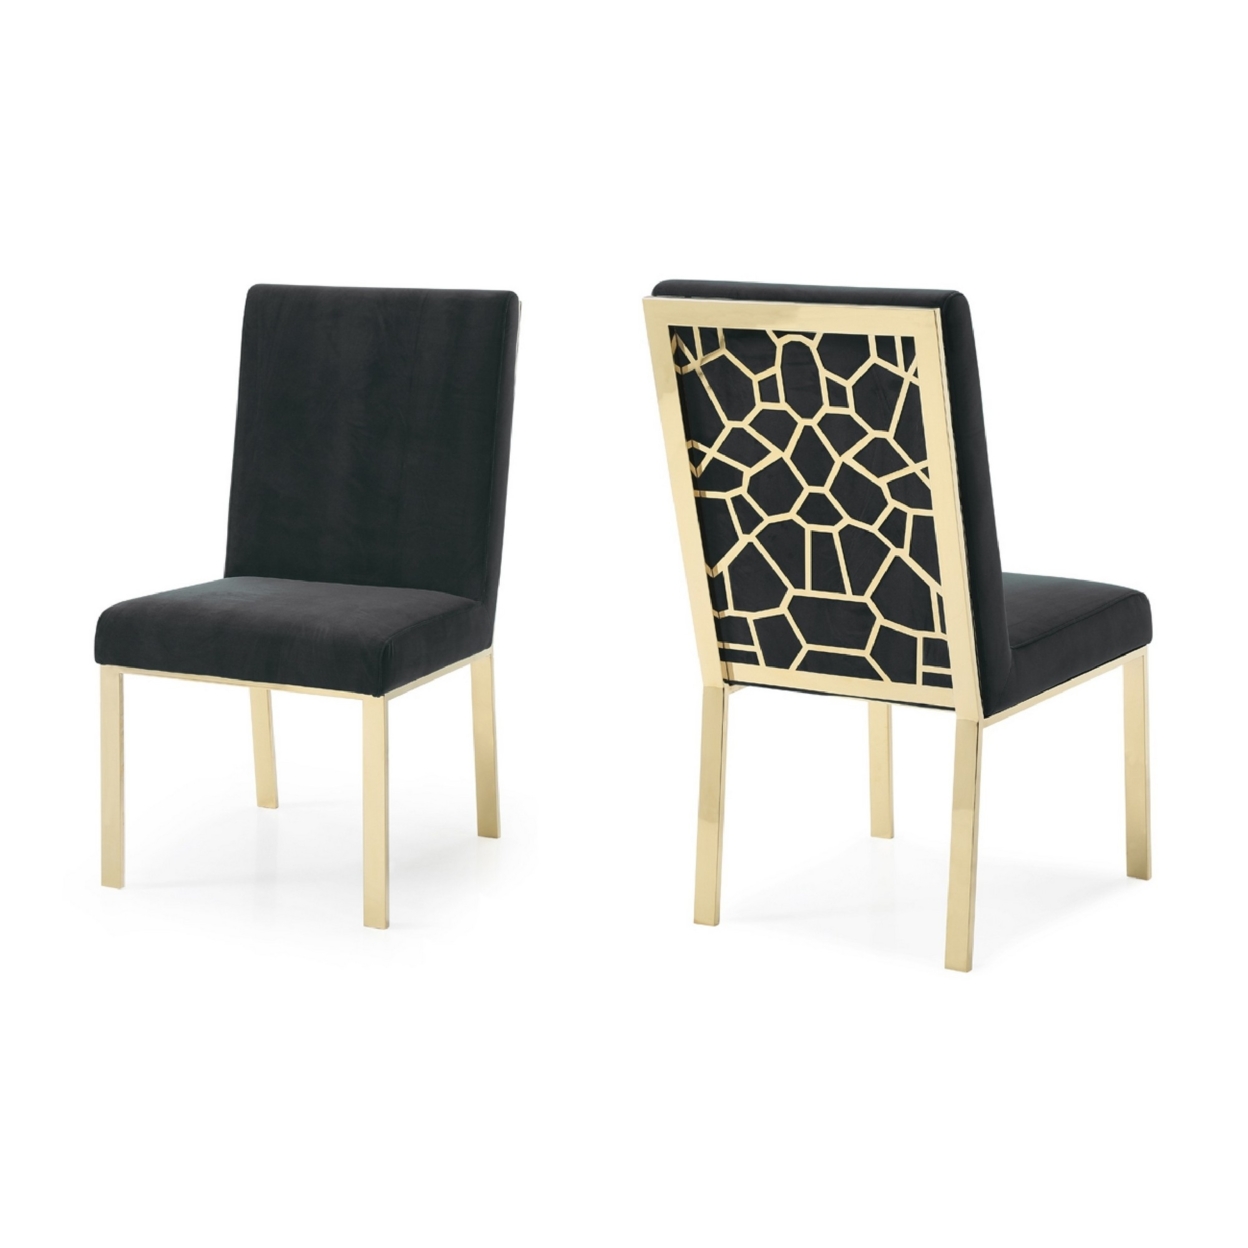 Cid 21 Inch Modern Dining Chairs, Abstract Design, Set Of 2, Gold And Black- Saltoro Sherpi